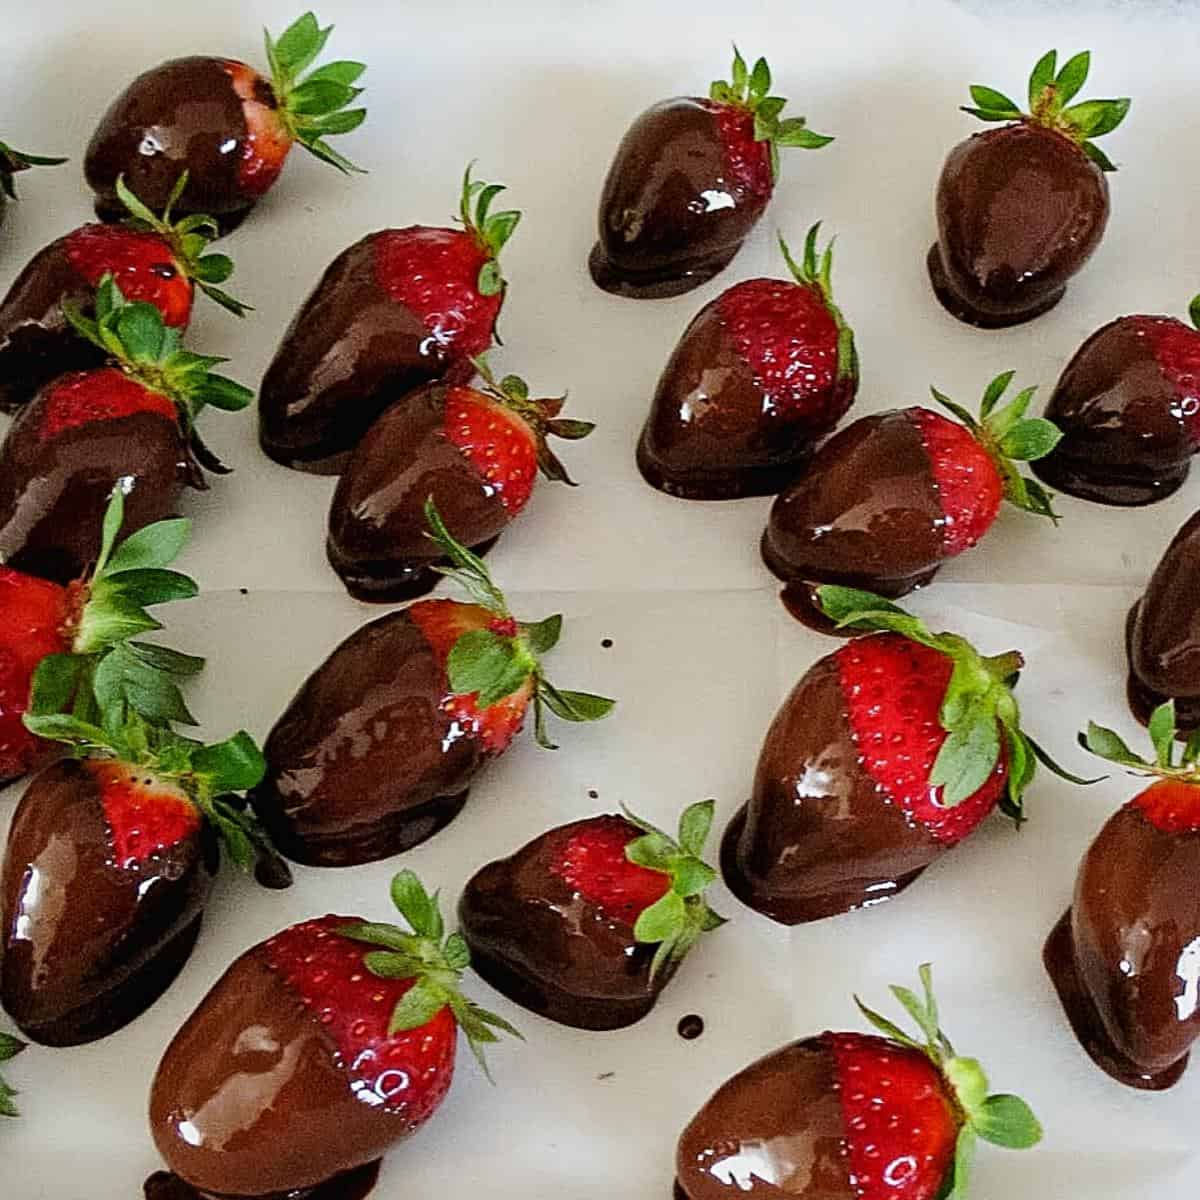 A baking sheet with strawberries covered with melted chocolate.